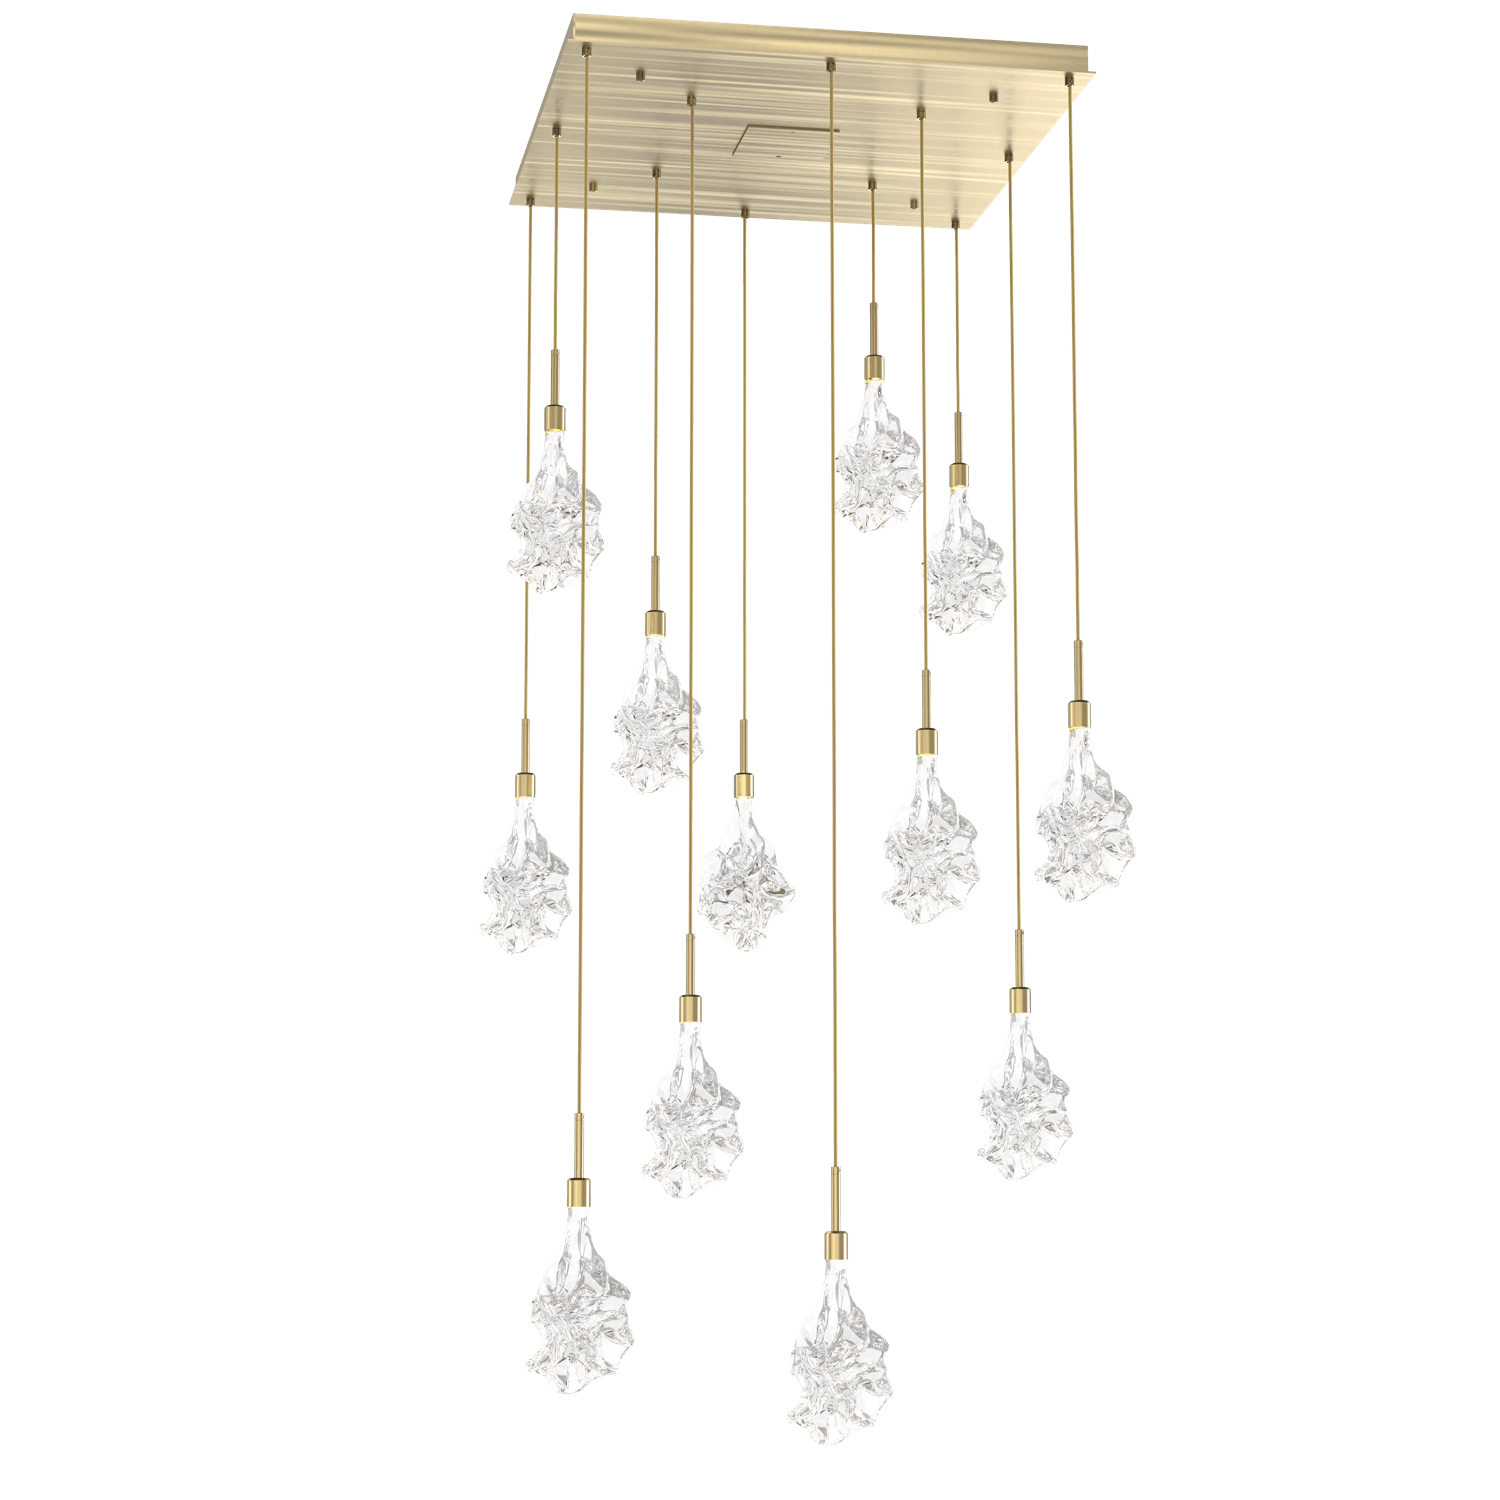 CHB0059-12-HB-Hammerton-Studio-Blossom-12-light-square-pendant-chandelier-with-heritage-brass-finish-and-clear-handblown-crystal-glass-shades-and-LED-lamping